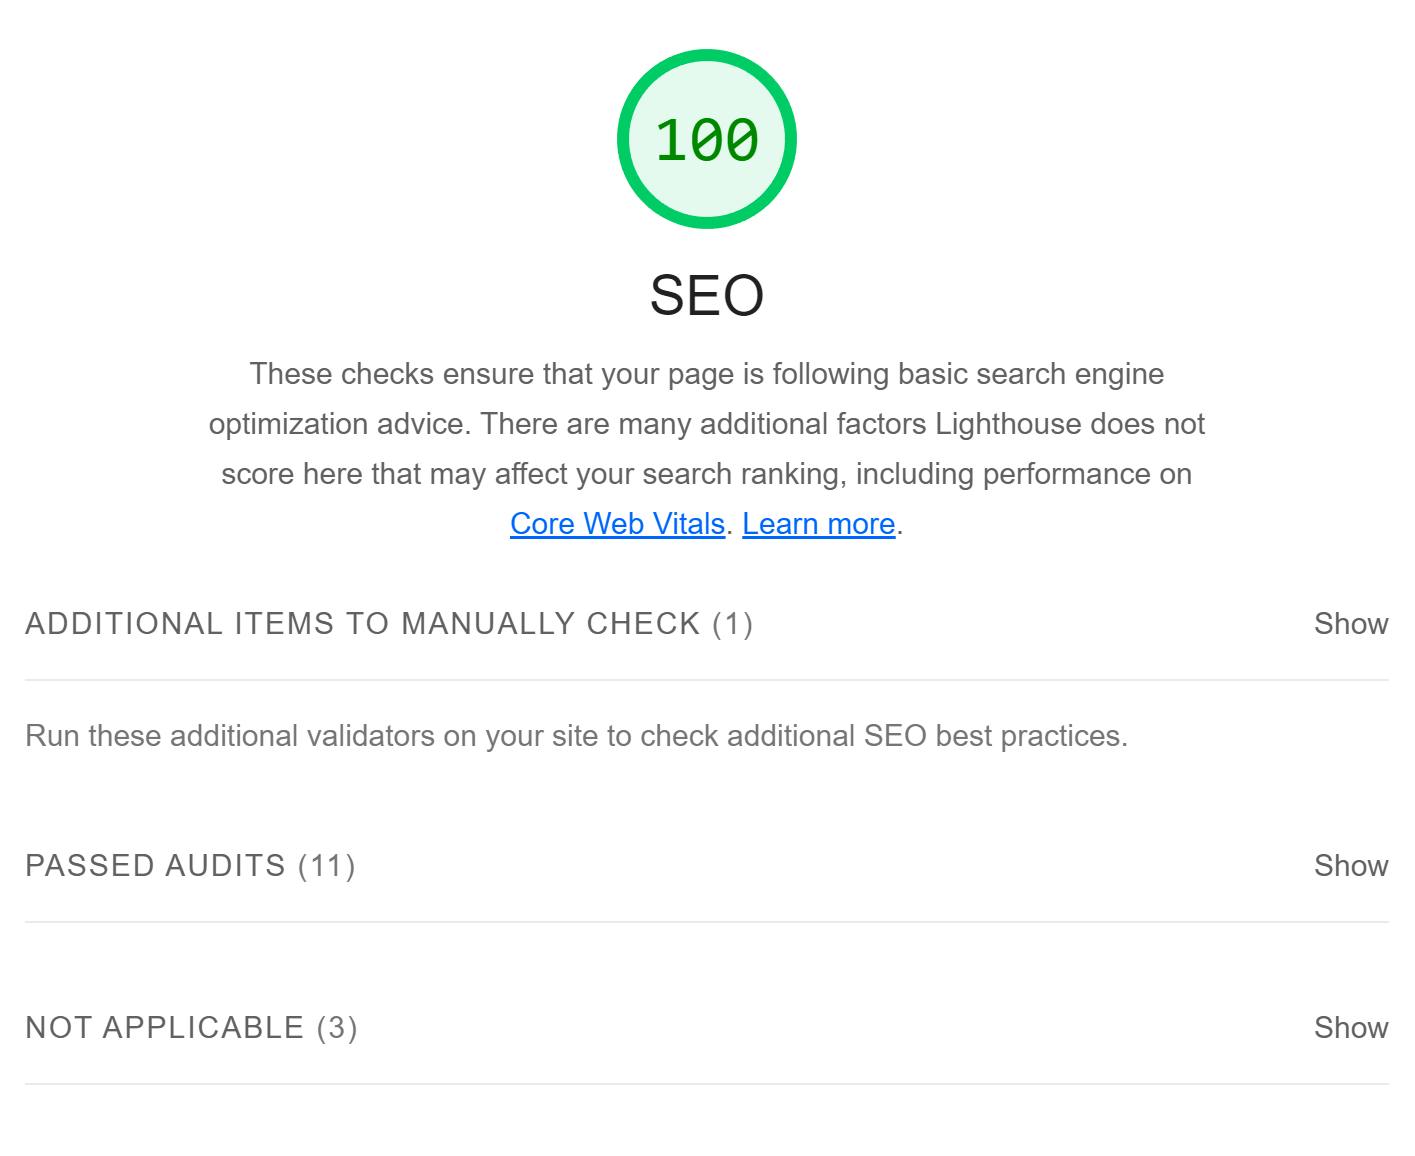 A 100 SEO score in Lighthouse that shows 11 passed audits and three "Not applicable" elements in collapsed sections.